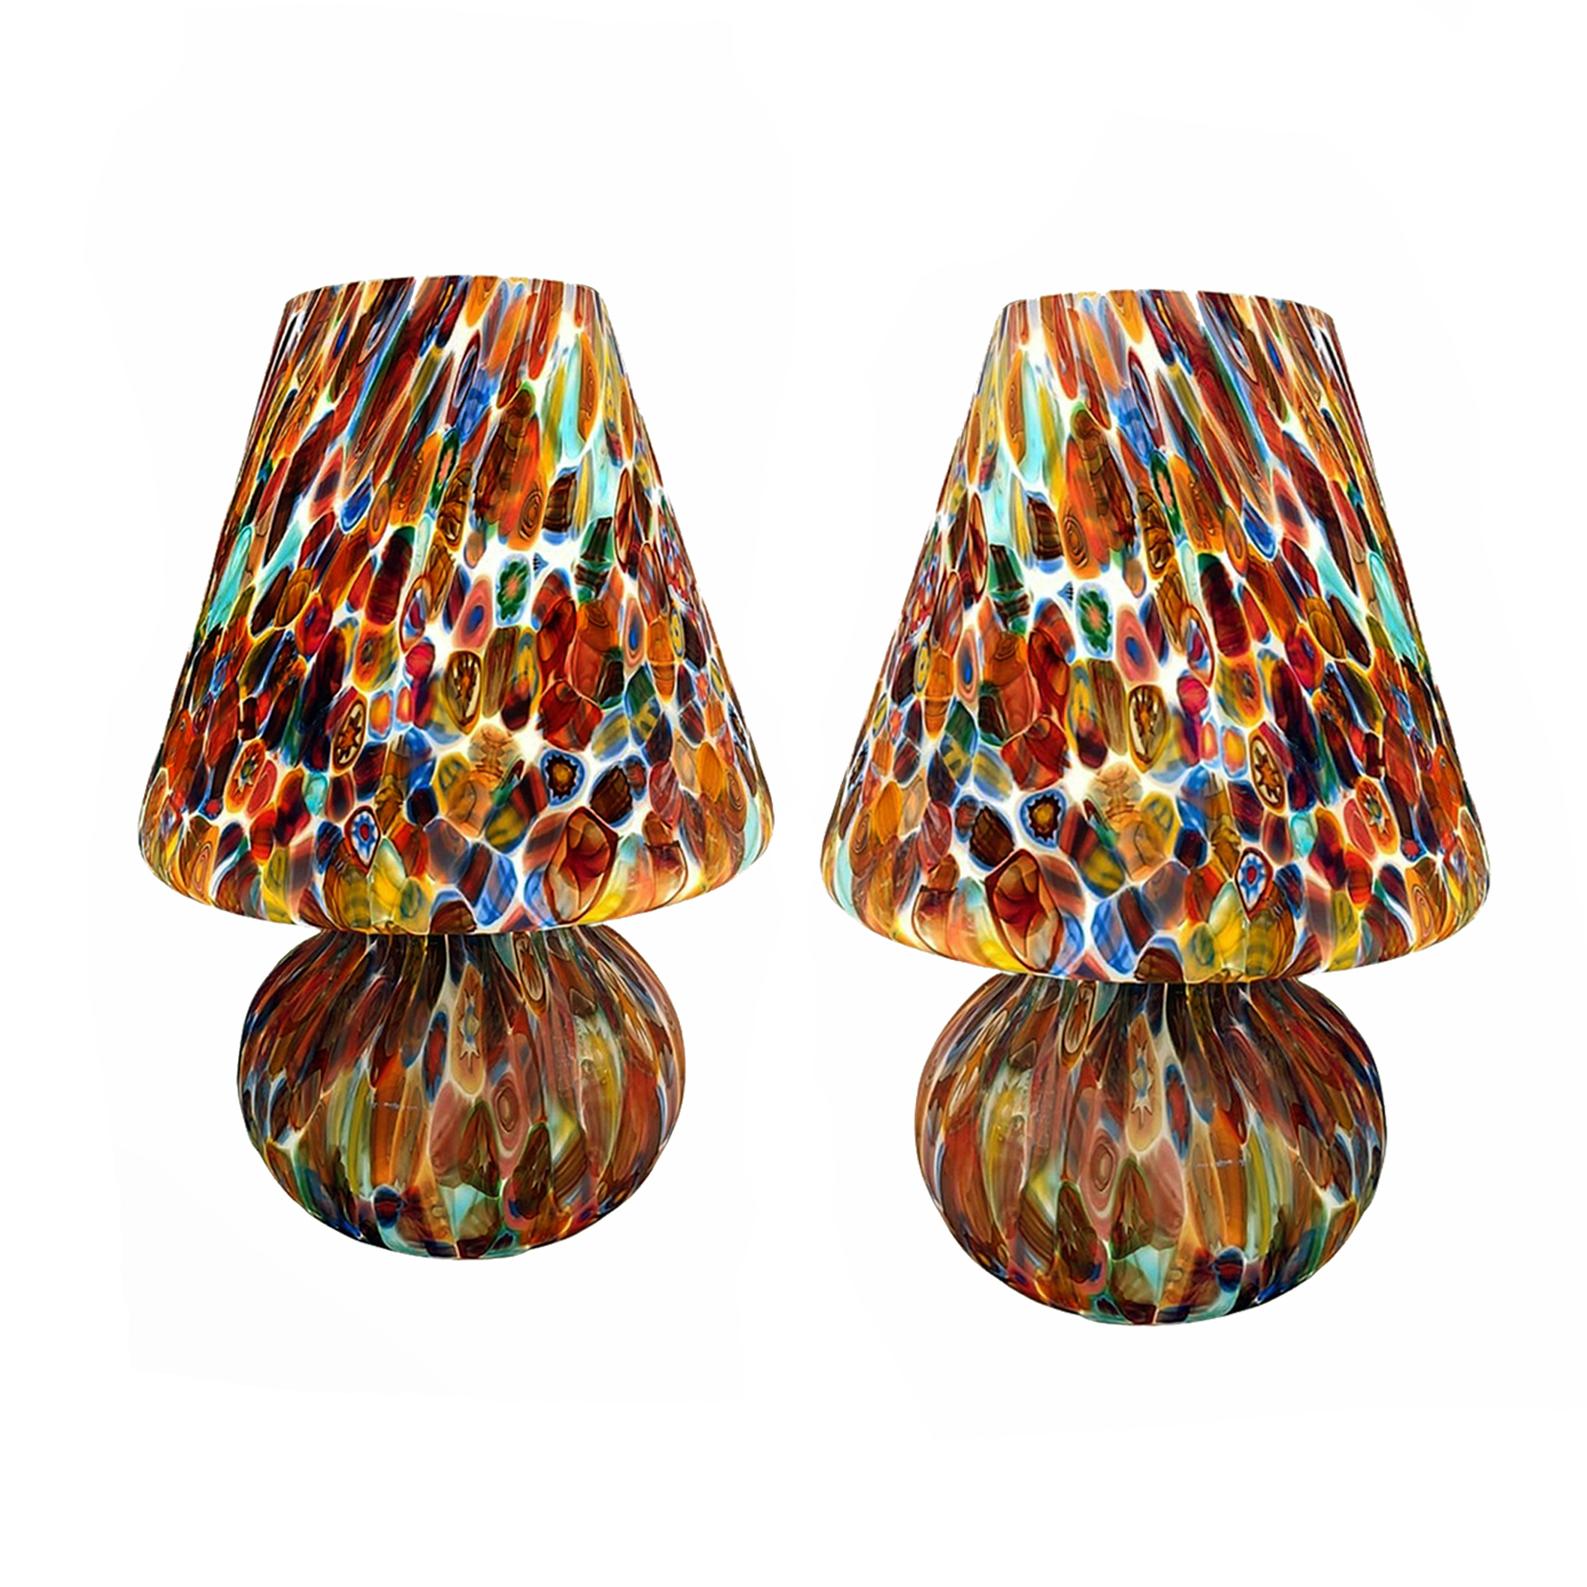 Pair of Big Hancrafted Murano Table Lamps Murrine Millefiori Decor, Italy 2000's For Sale